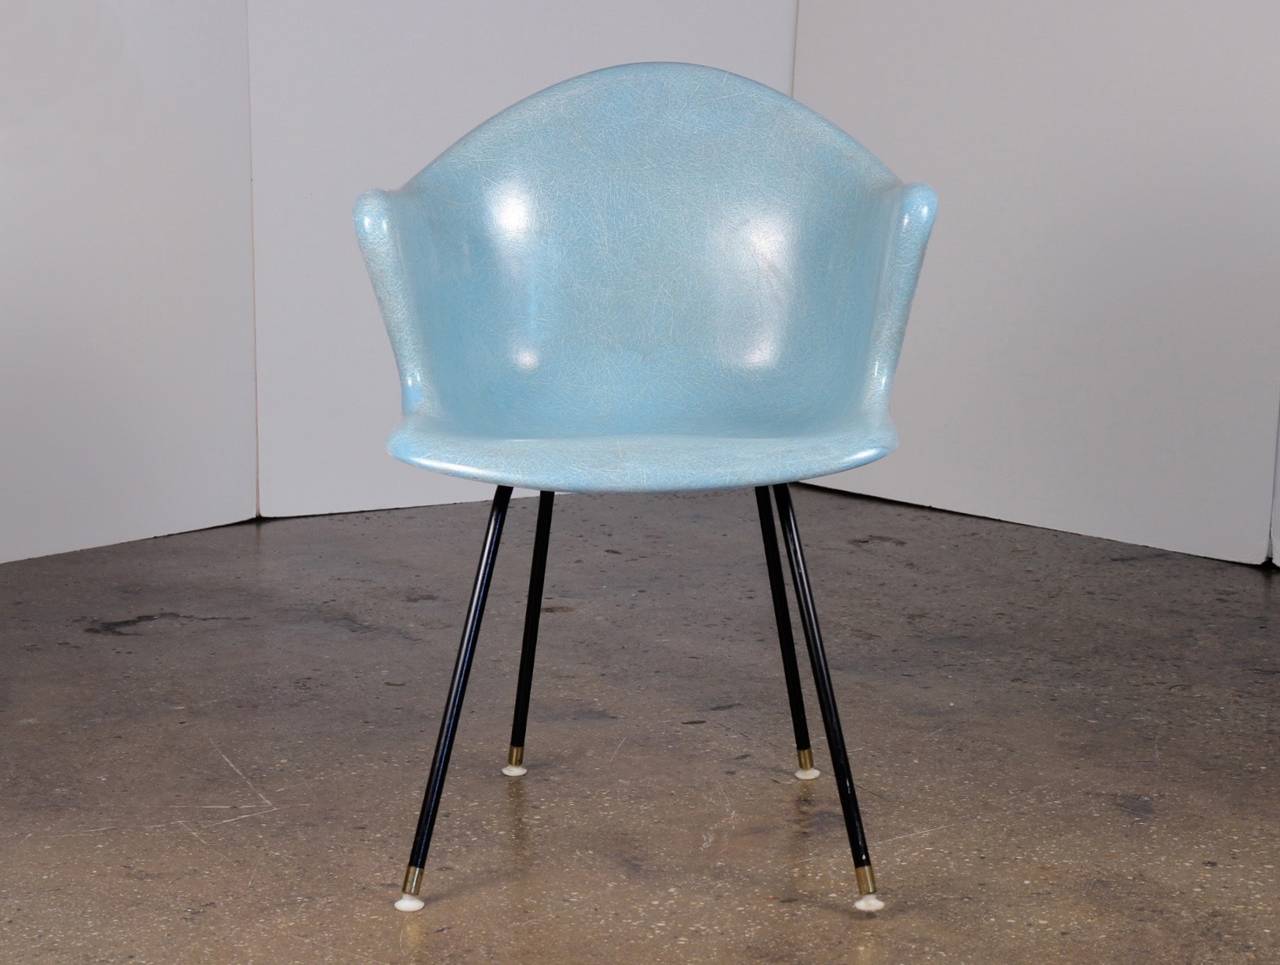 Vintage Eames-era armchair shows off a beautiful thready fiberglass shell in soft, dusty aqua blue. Reminiscent of an Eames chair, but with its own twist. Curved edge adds elegance. Made by Cole Steel. 1960s. In excellent vintage condition.

We